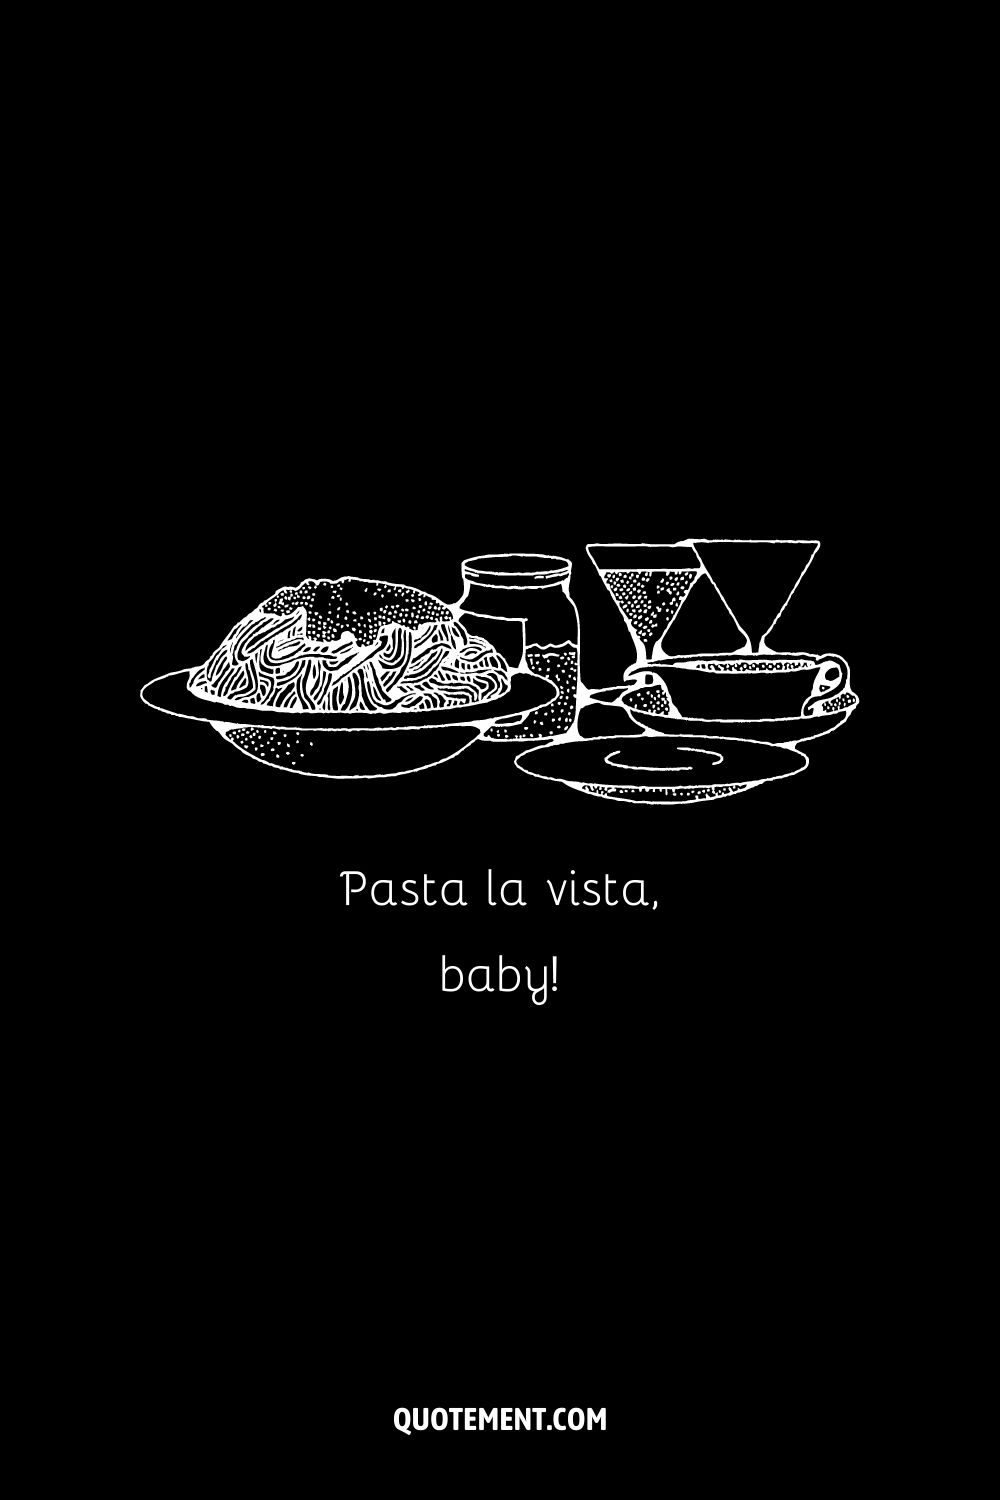 Cute food caption idea represented by a black and white illustration of the dishes